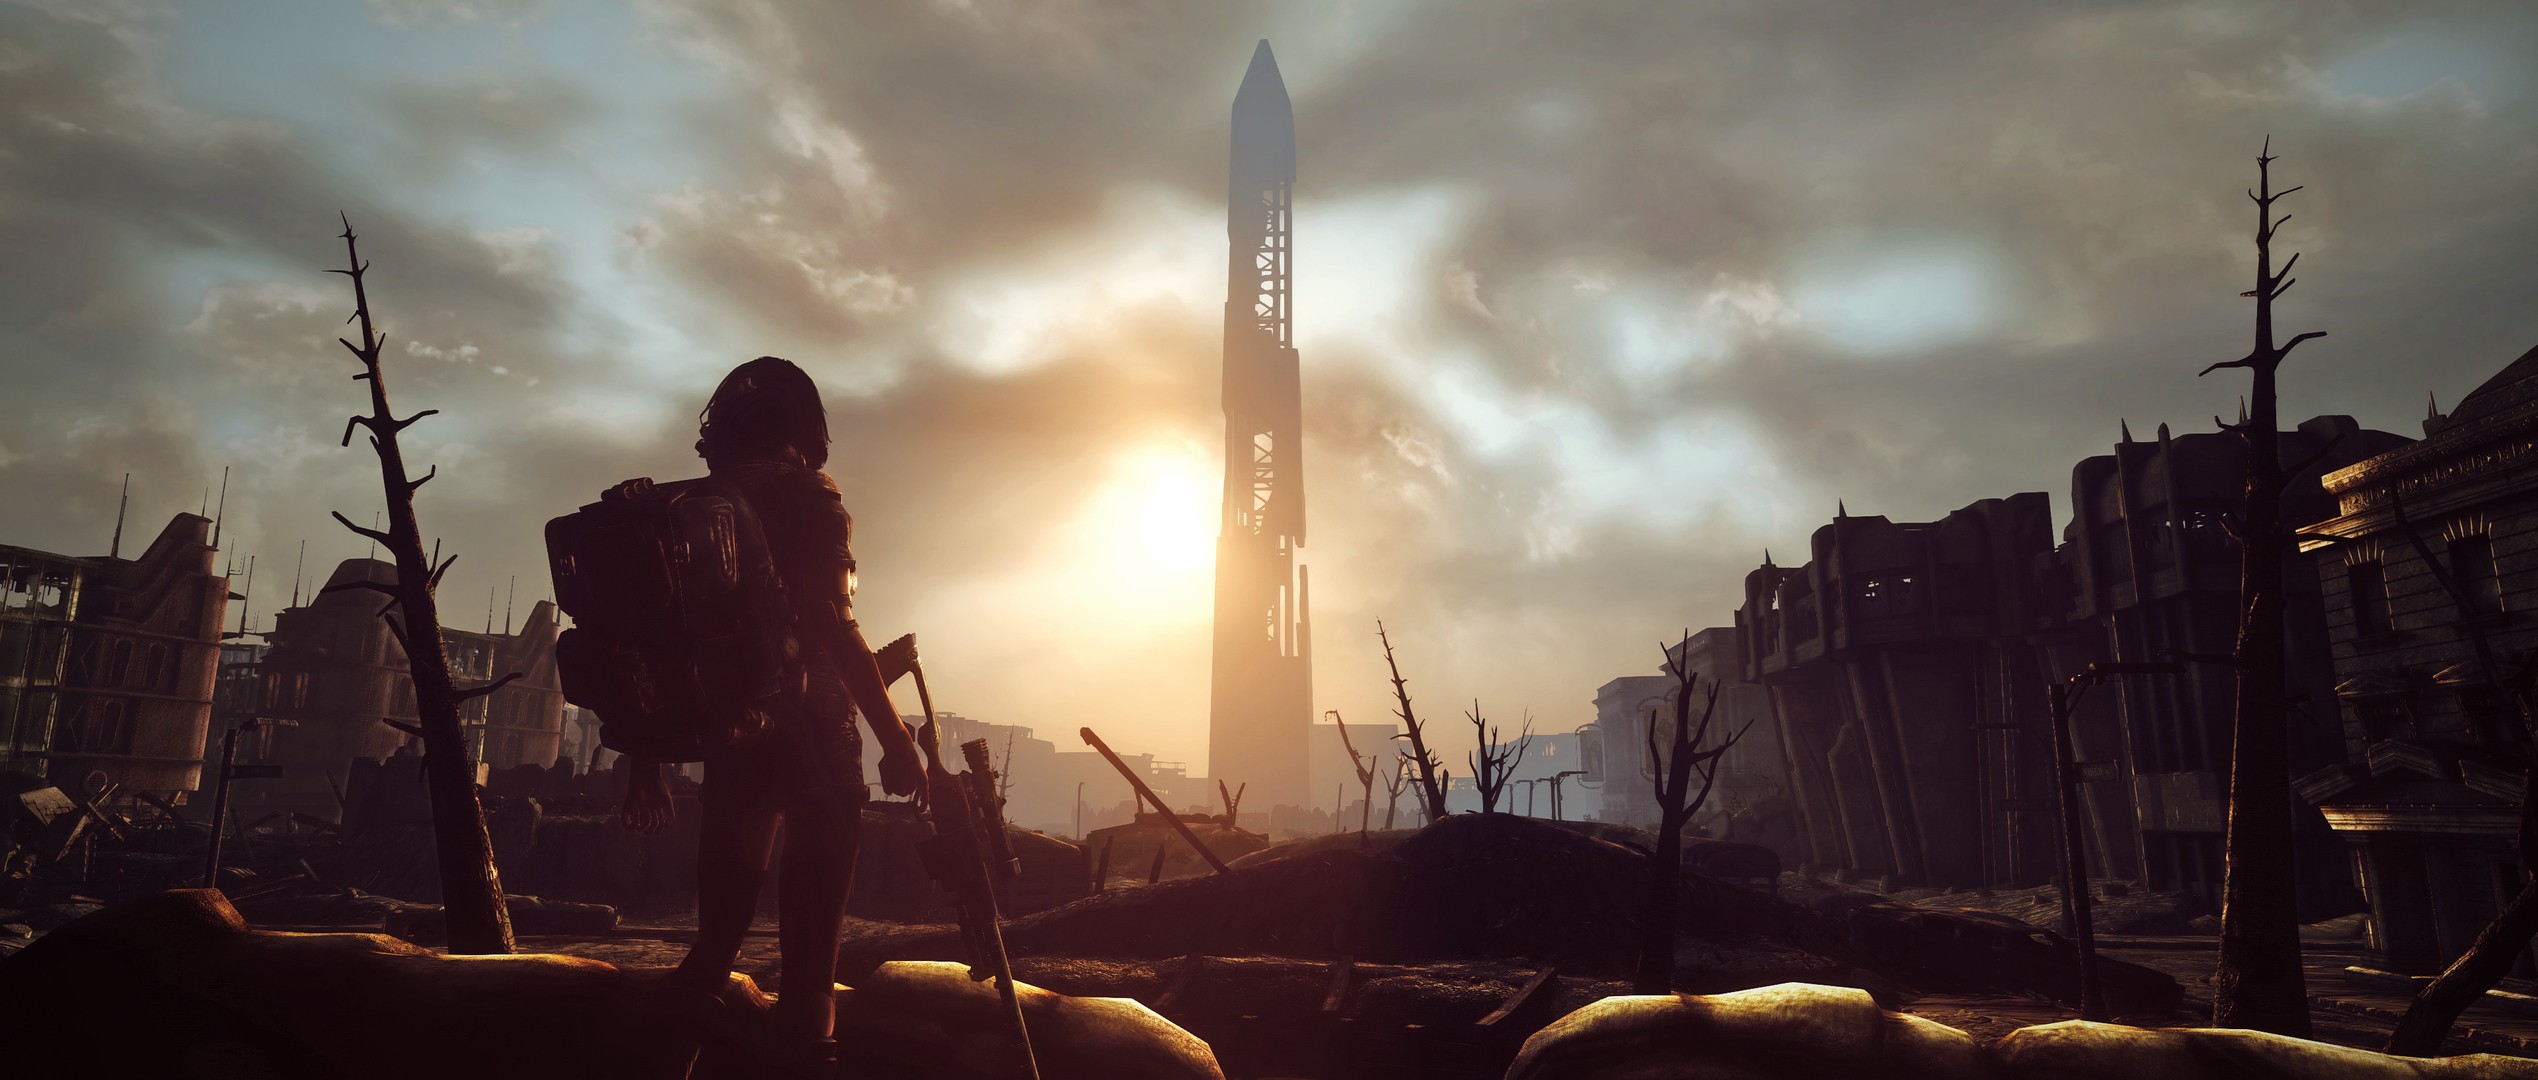 Fallout 3 Video Games 2538x1080